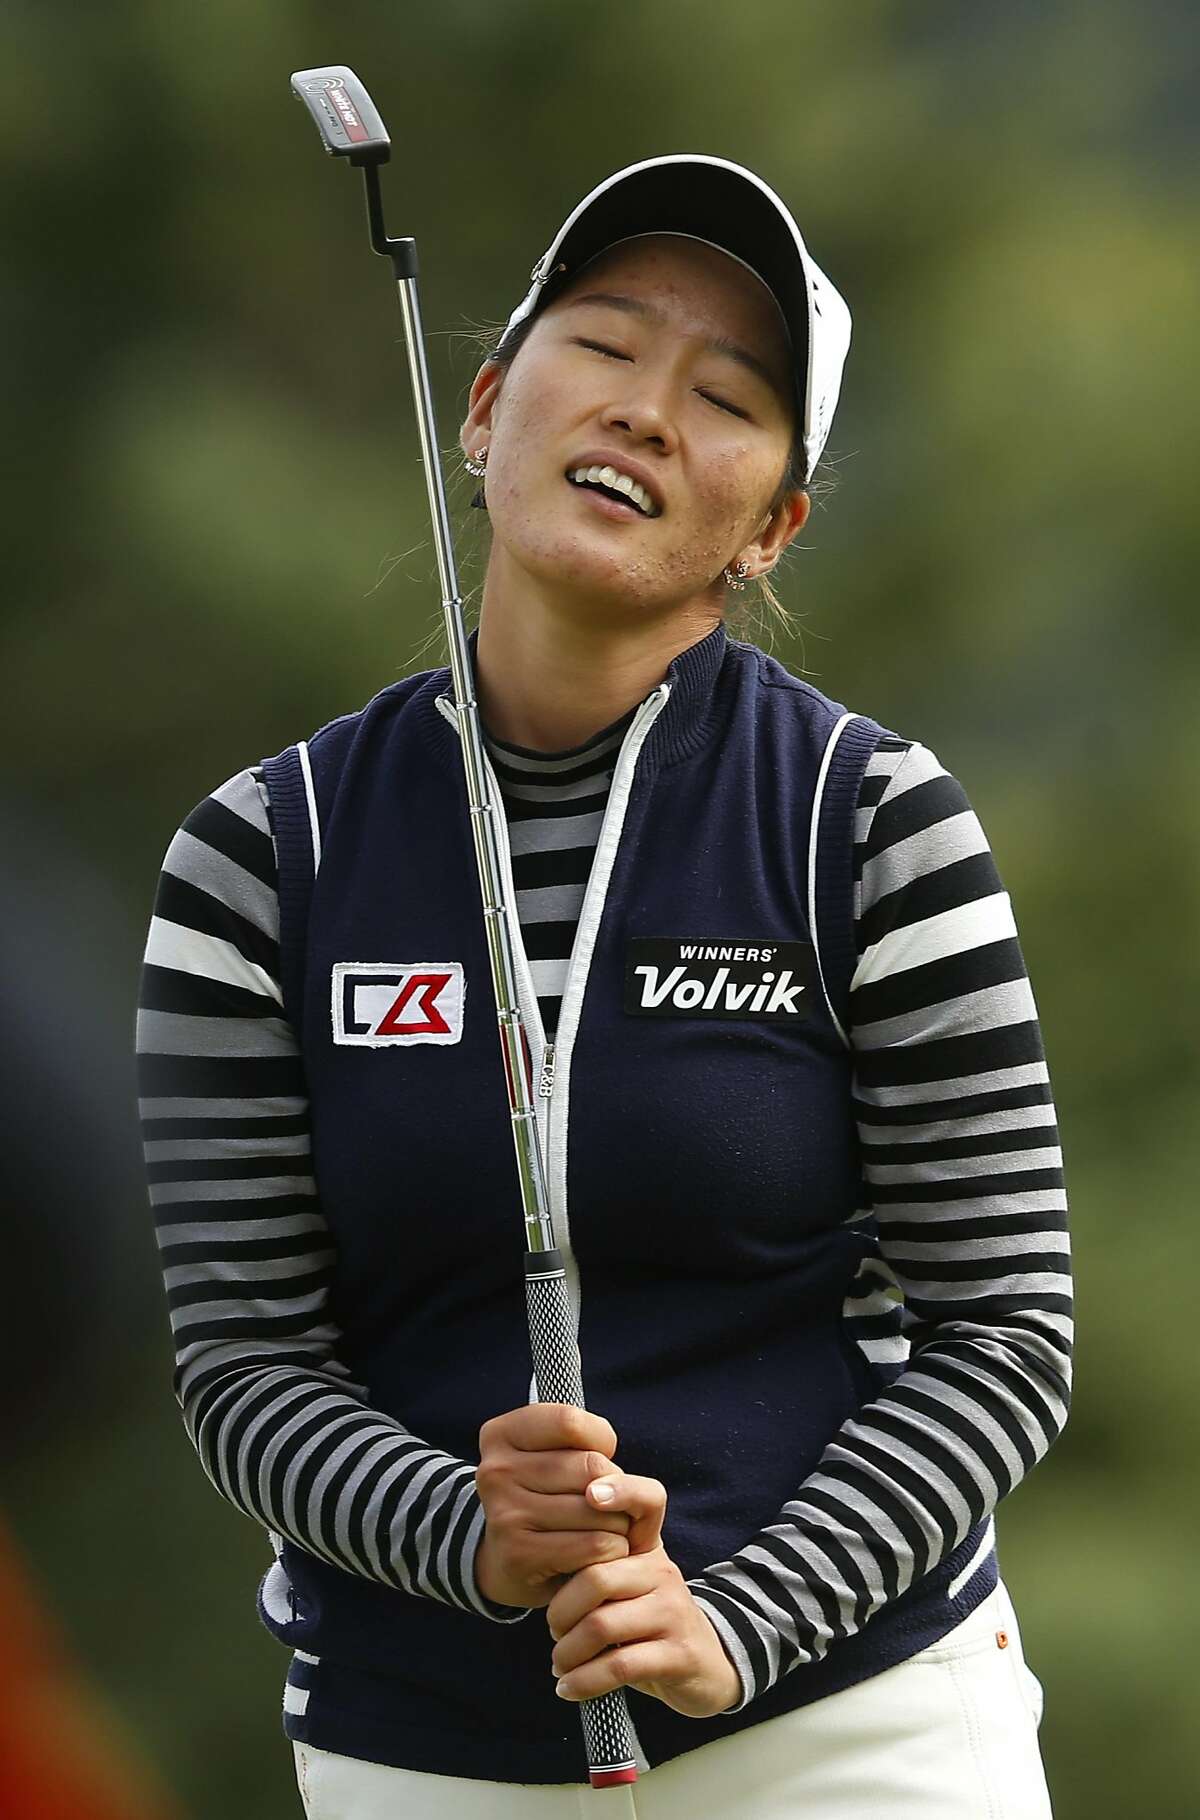 CALGARY, AB - AUGUST 28: Chella Choi of South Korea reacts to her putt on the 18th hole during the final round of the Canadian Pacific Women's Open at Priddis Greens Golf and Country Club on August 28, 2016 in Calgary, Canada. (Photo by Todd Korol/Getty Images)